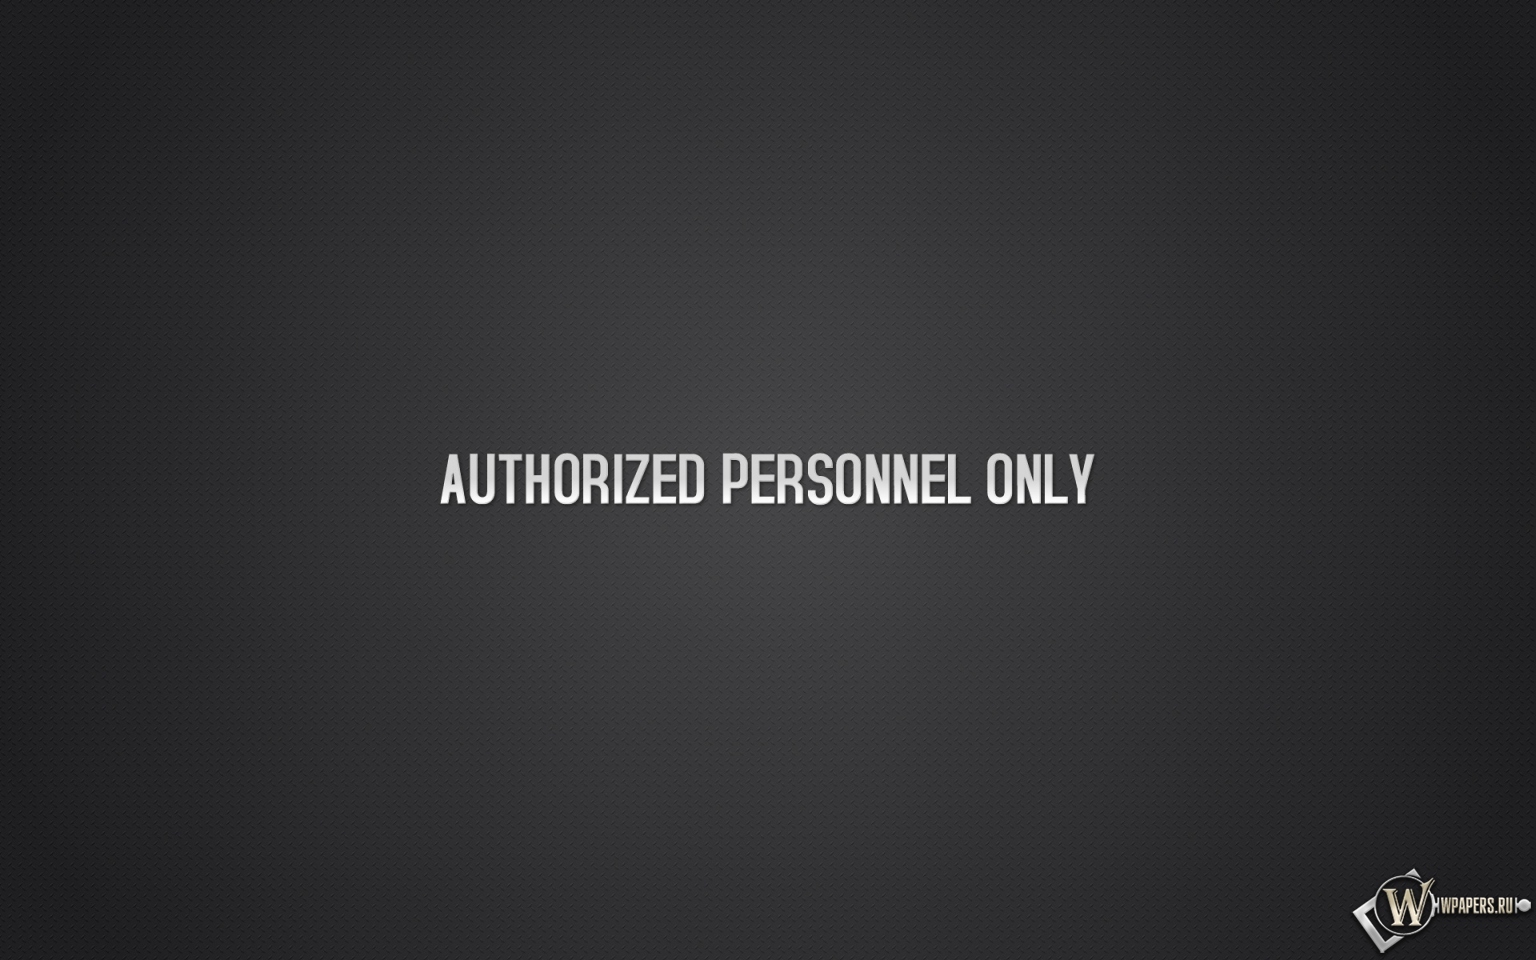 Authorized personnel only 1536x960